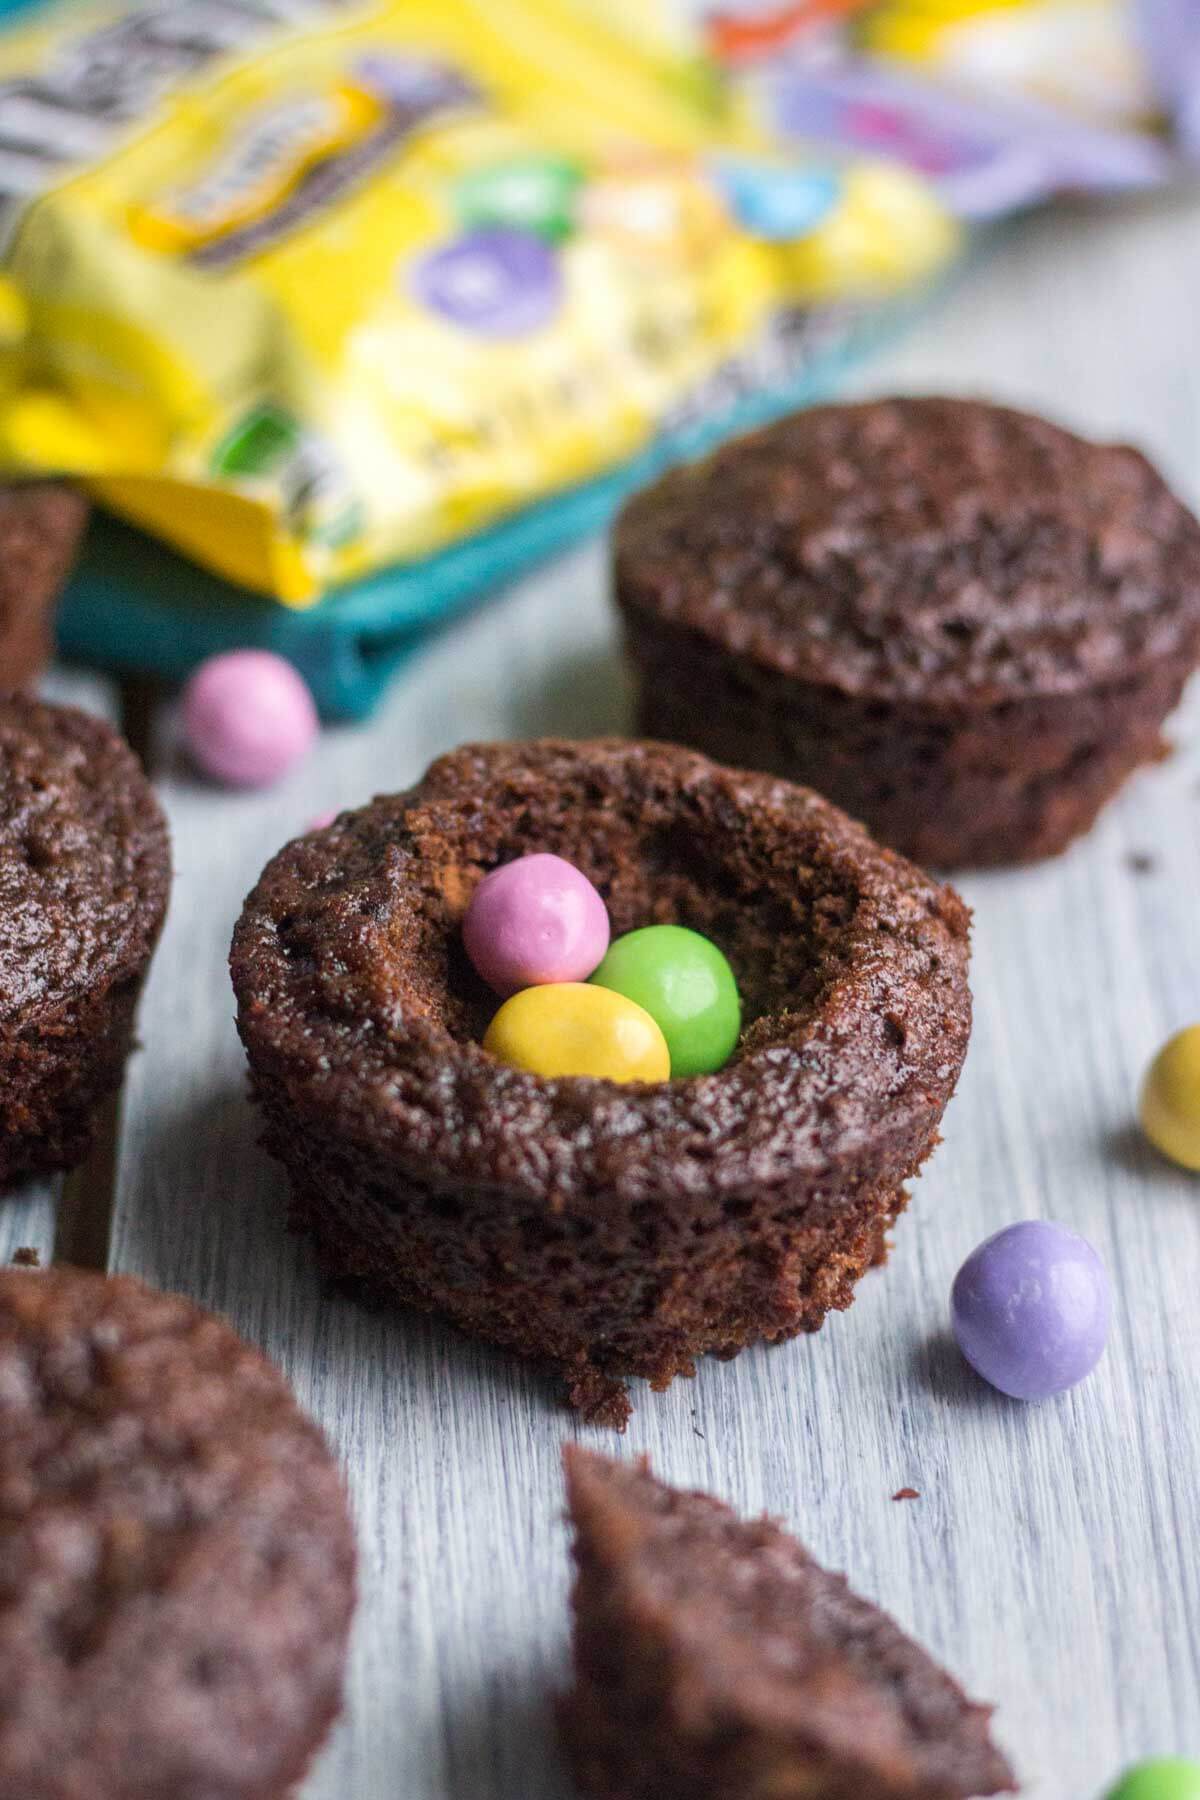 Light and fluffy chocolate cupcakes are topped with a sweet and creamy peanut butter frosting. Plus, there's a fun Easter surprise on the inside! These Chocolate Peanut Butter Piñata Cupcakes will surprise and delight all of your friends and family.